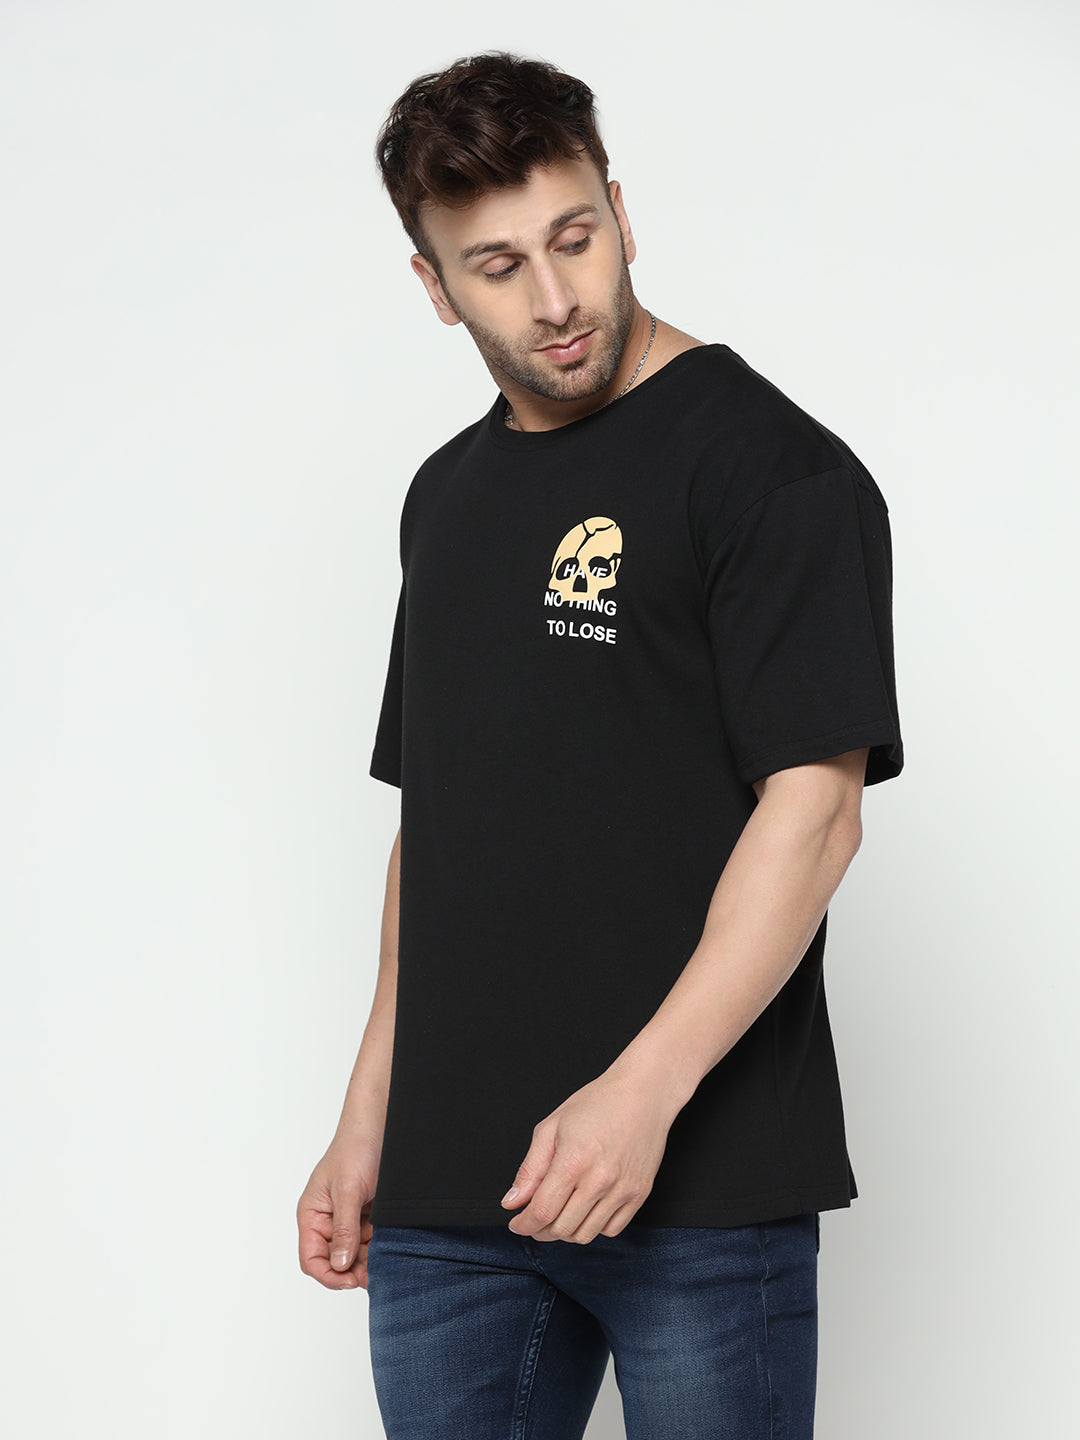 Oversized Black Half Sleeve Have Nothing to Lose Printed T-Shirt